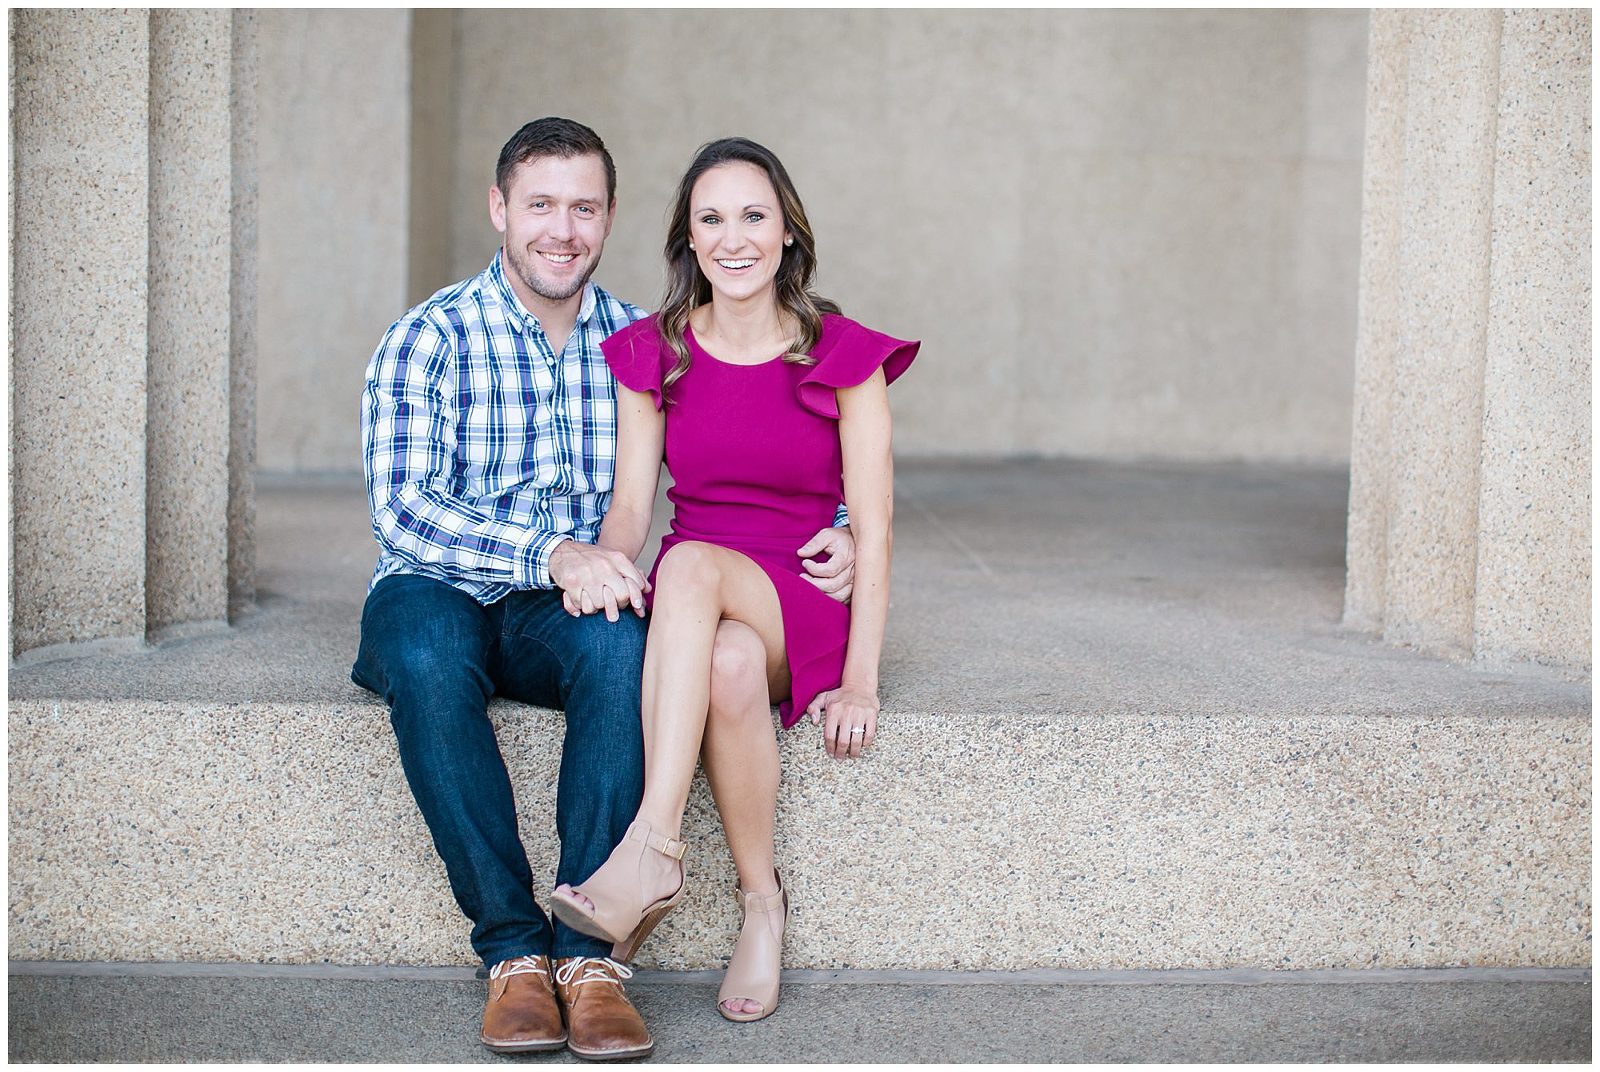 Kelsey & Cody | Engaged! » Katie Painter Photography